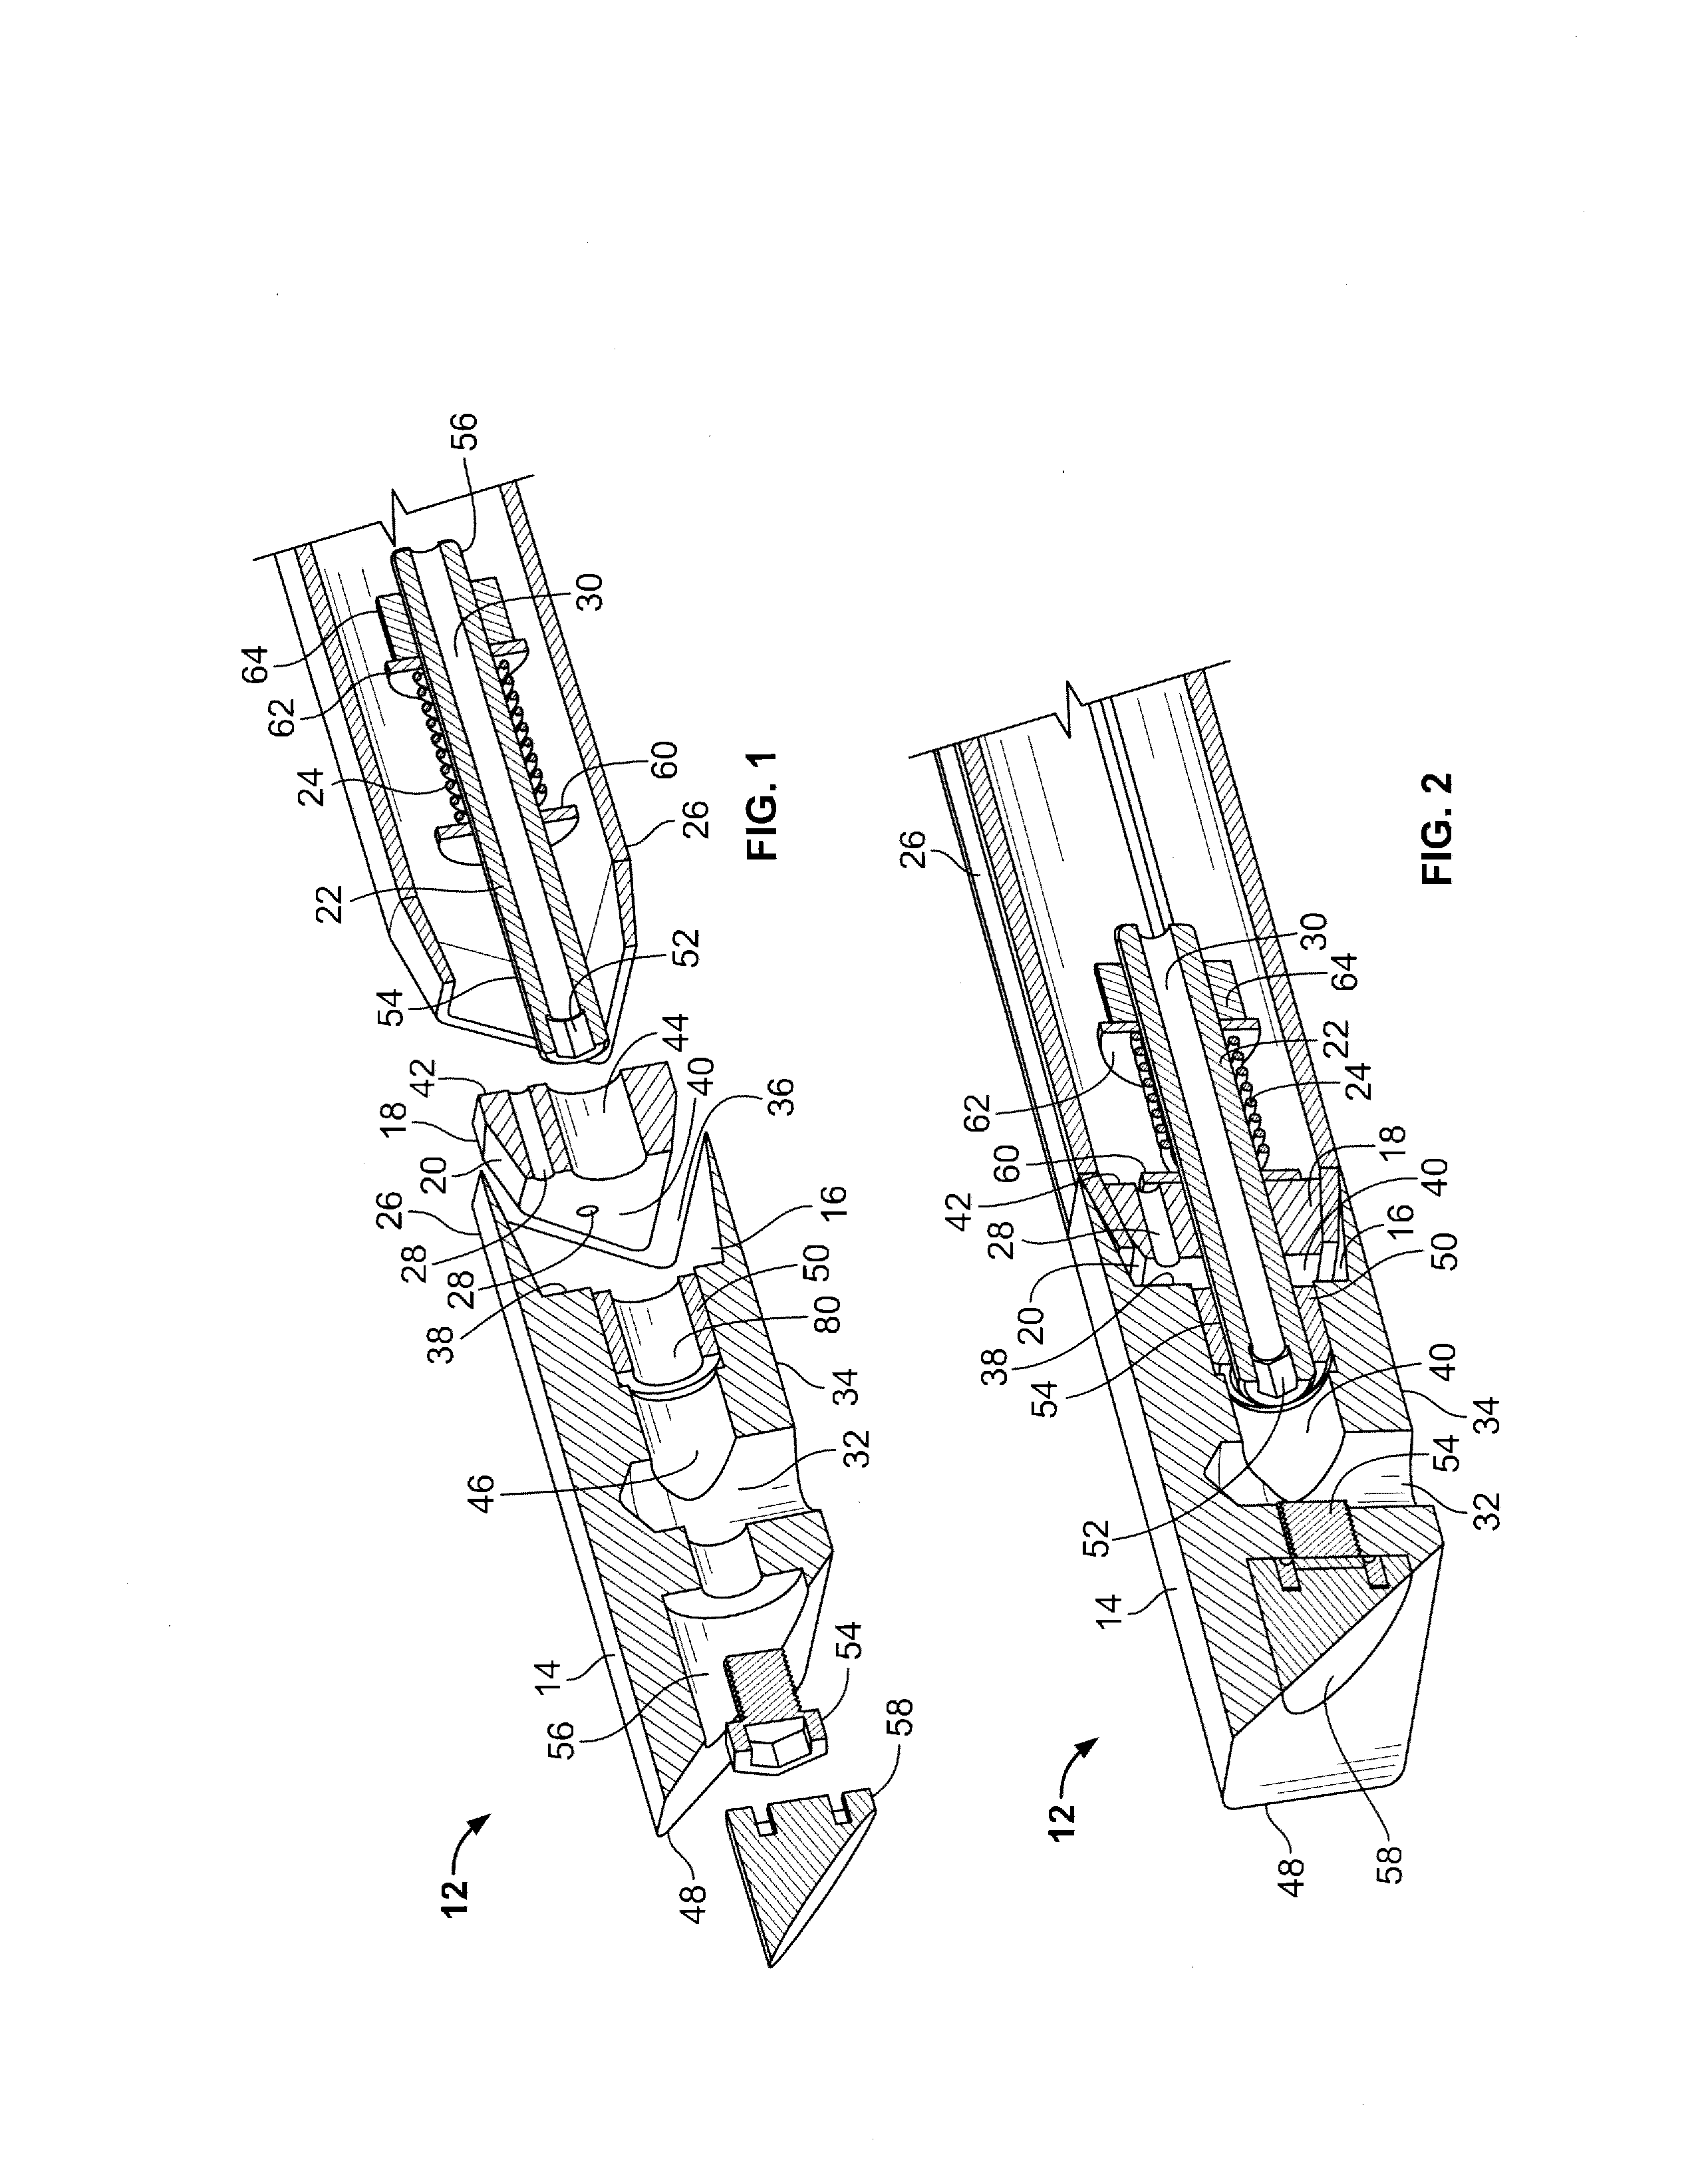 Composite fabrication vent assembly and method